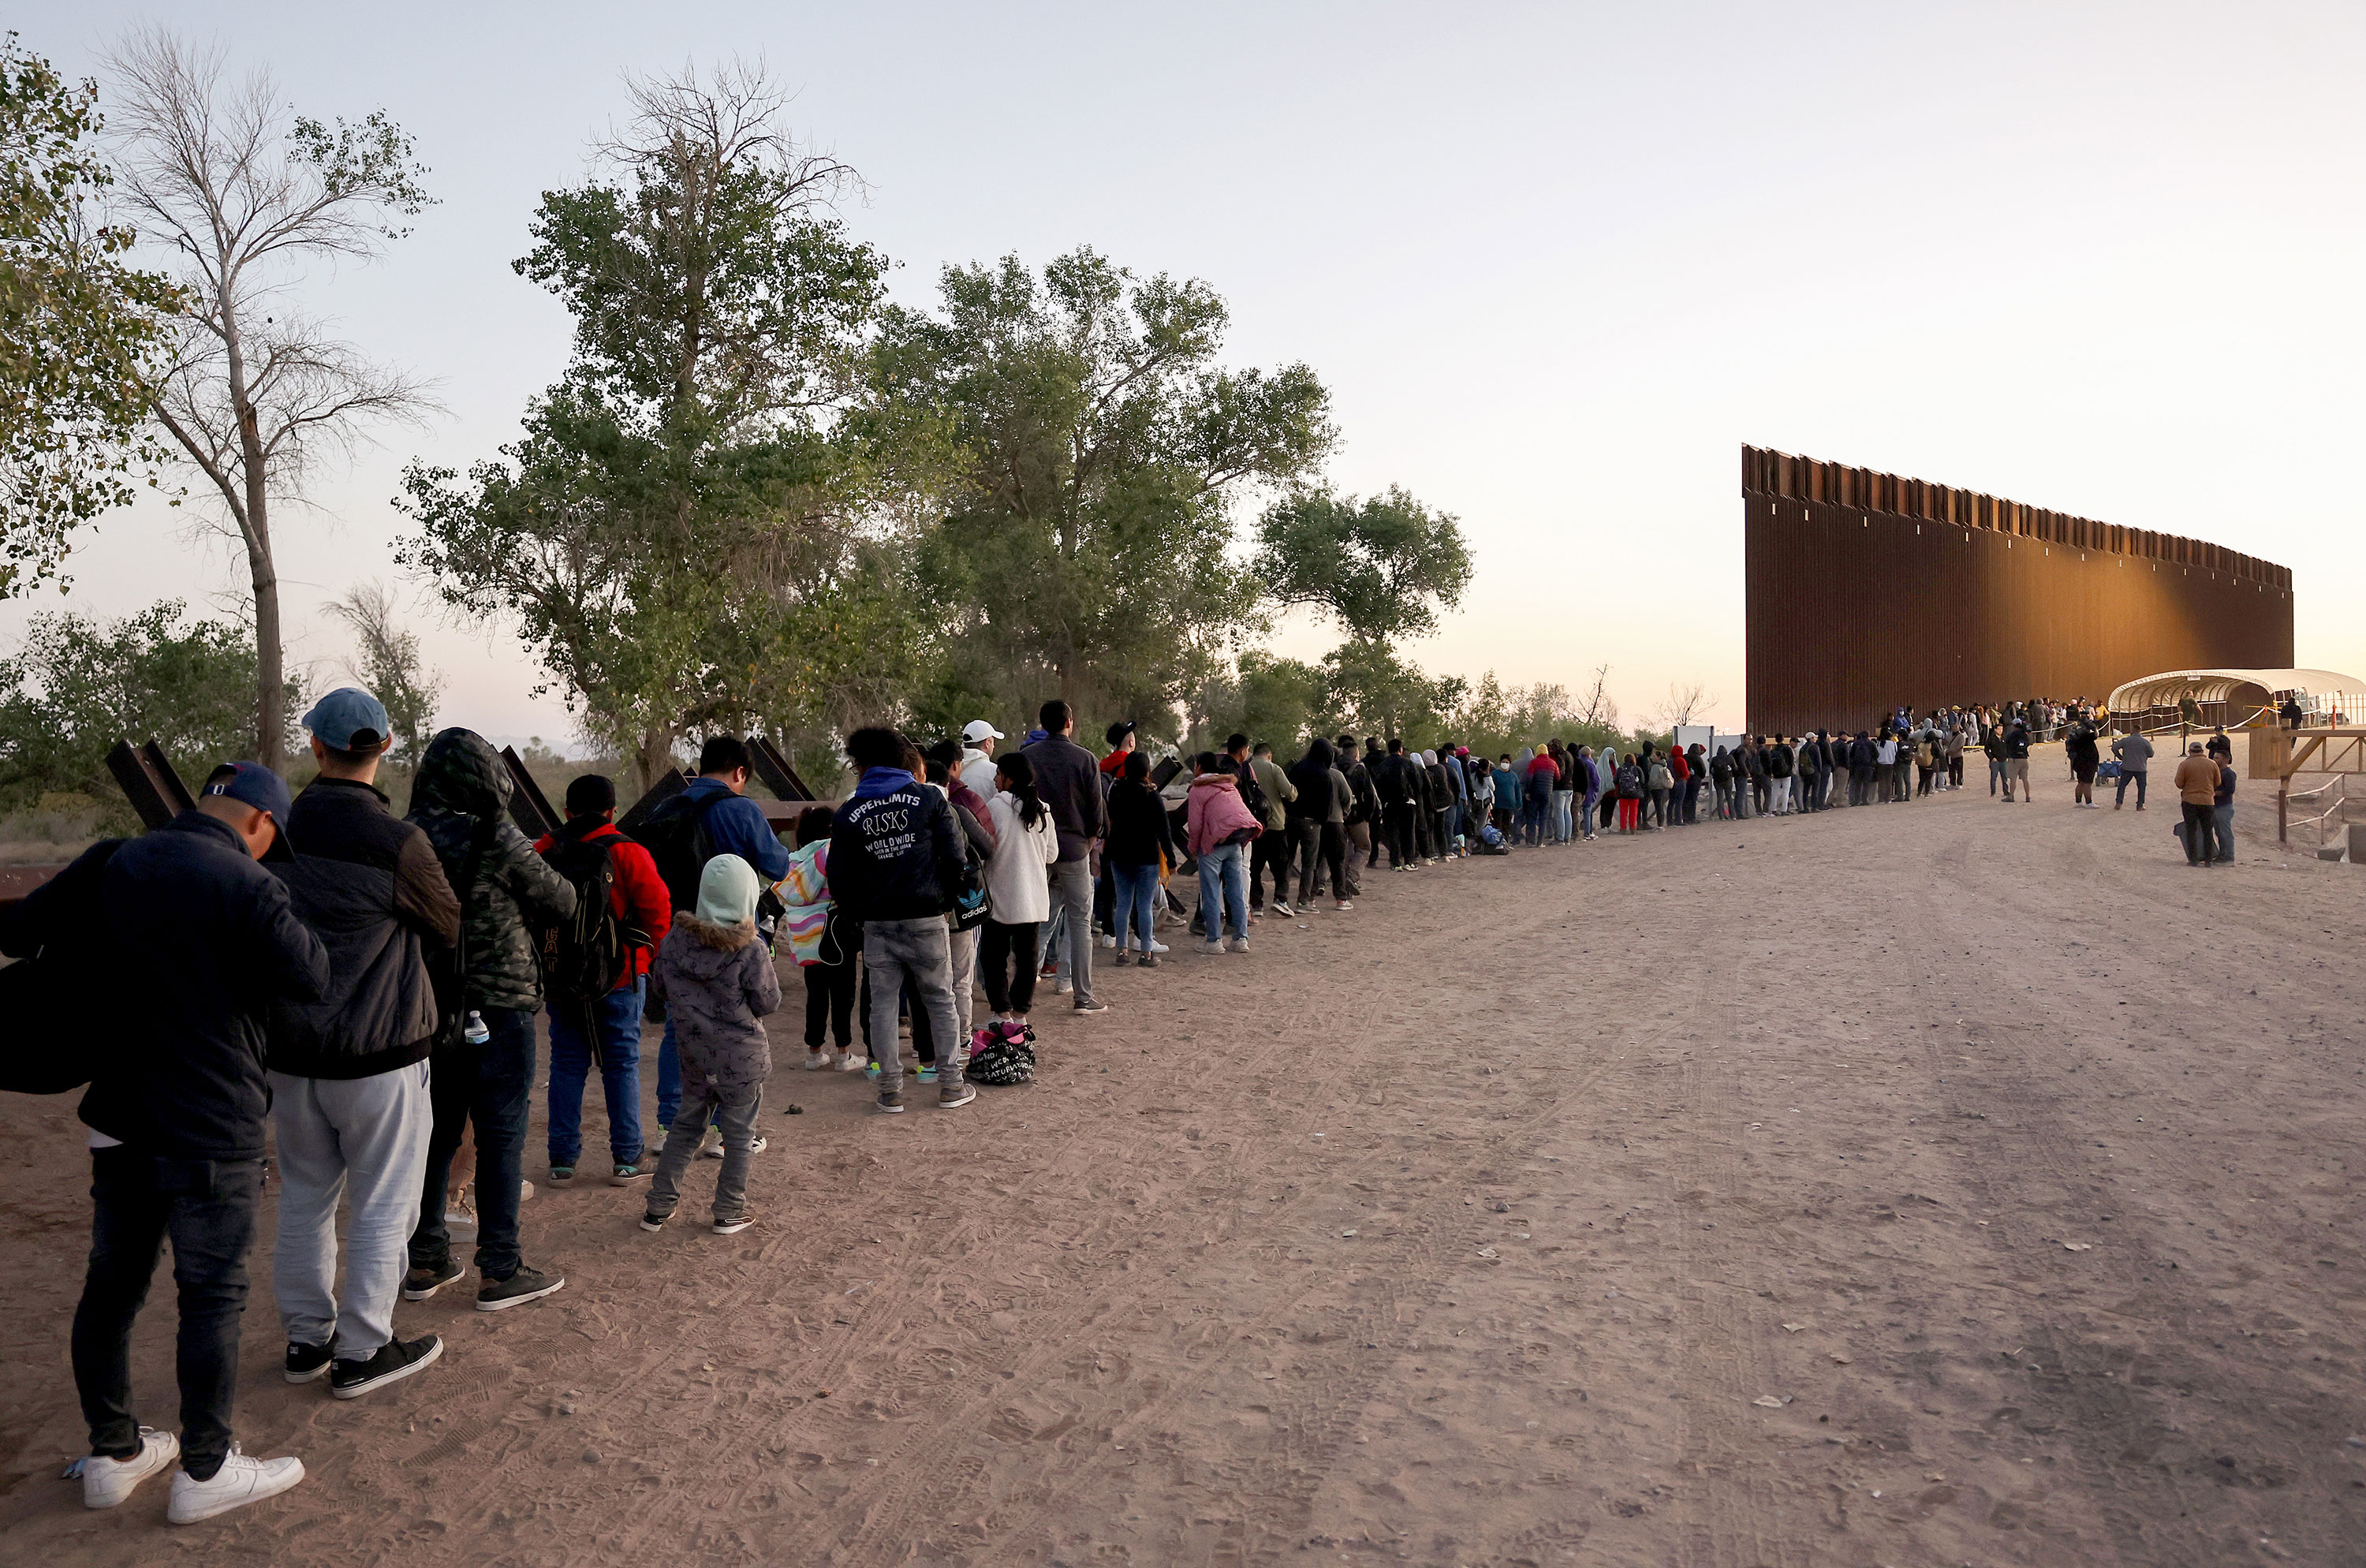 Migrants seeking asylum in the United States wait in line to be processed by US Border Patrol agents Thursday after crossing into Yuma, Arizona from Mexico.